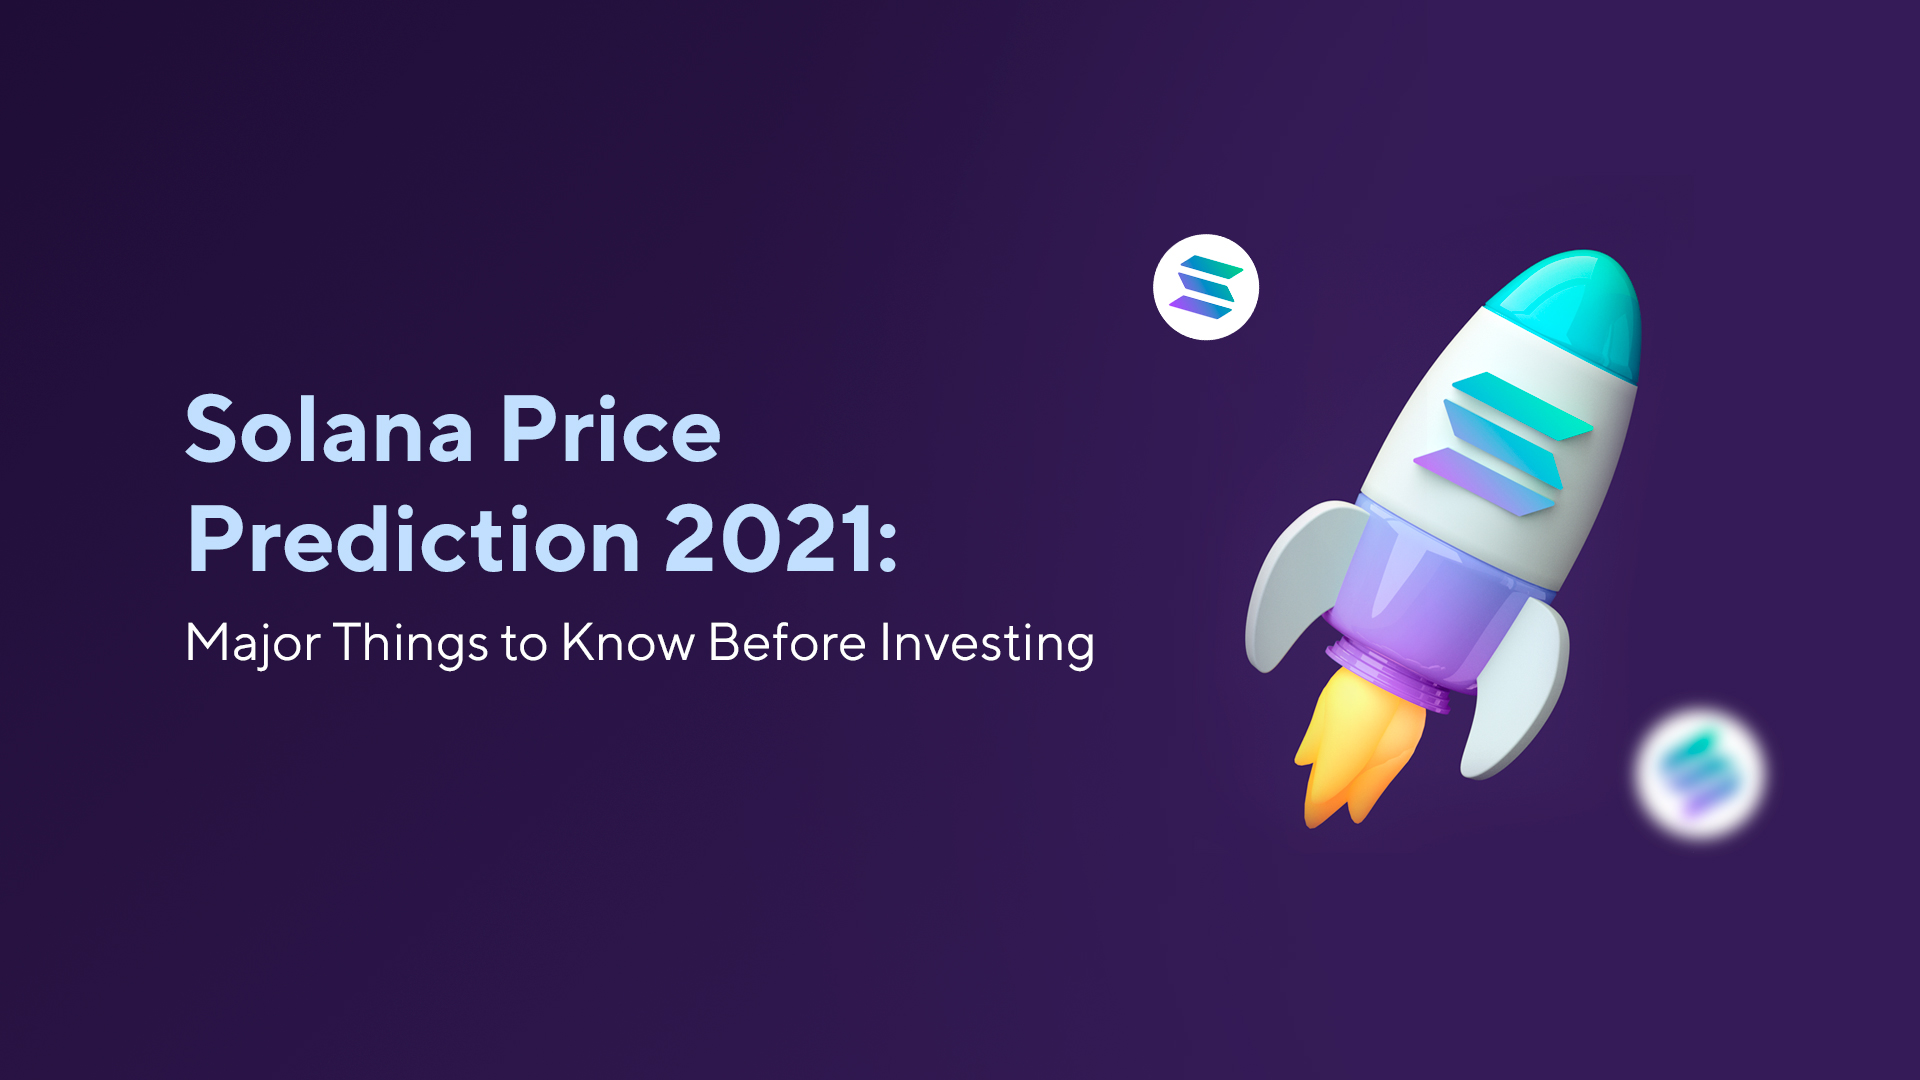 Solana Price Prediction 2021: Major Things to Know Before Investing